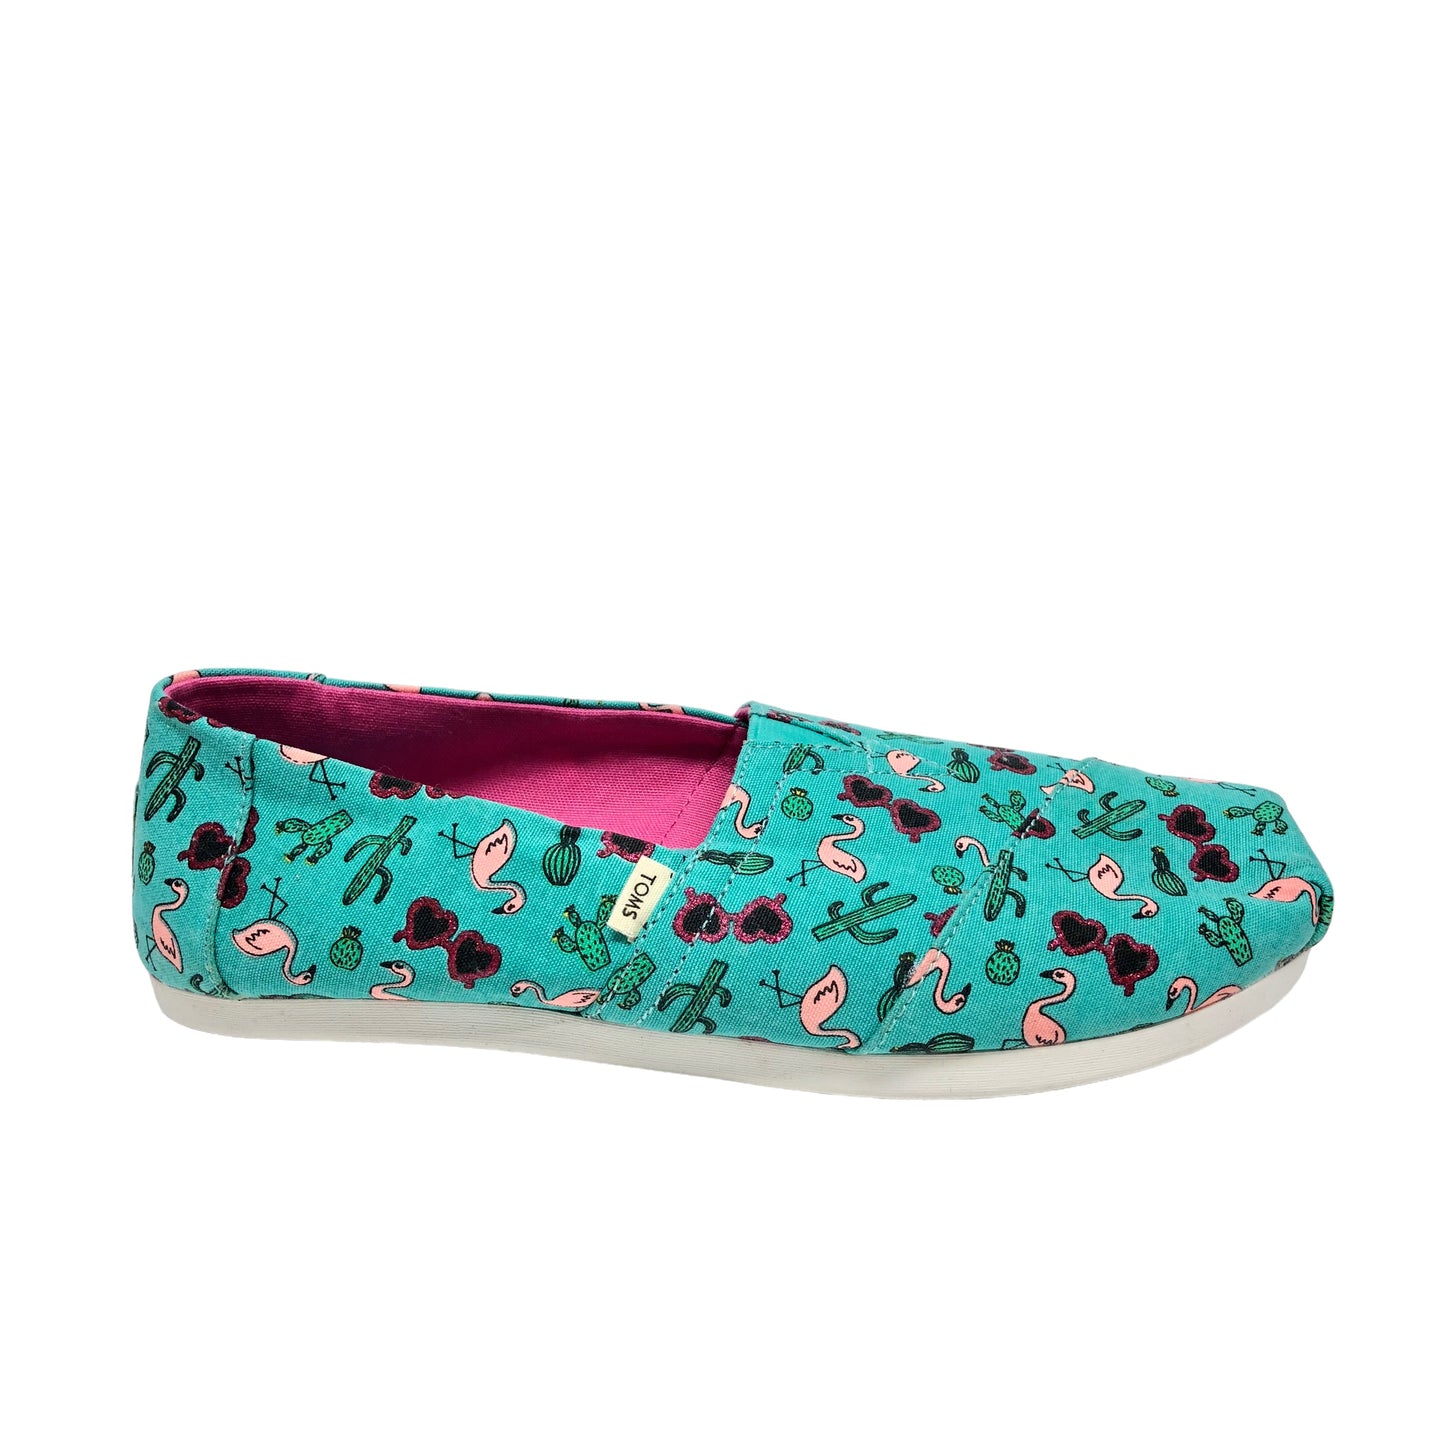 Shoes Flats Moccasin By Toms  Size: 7